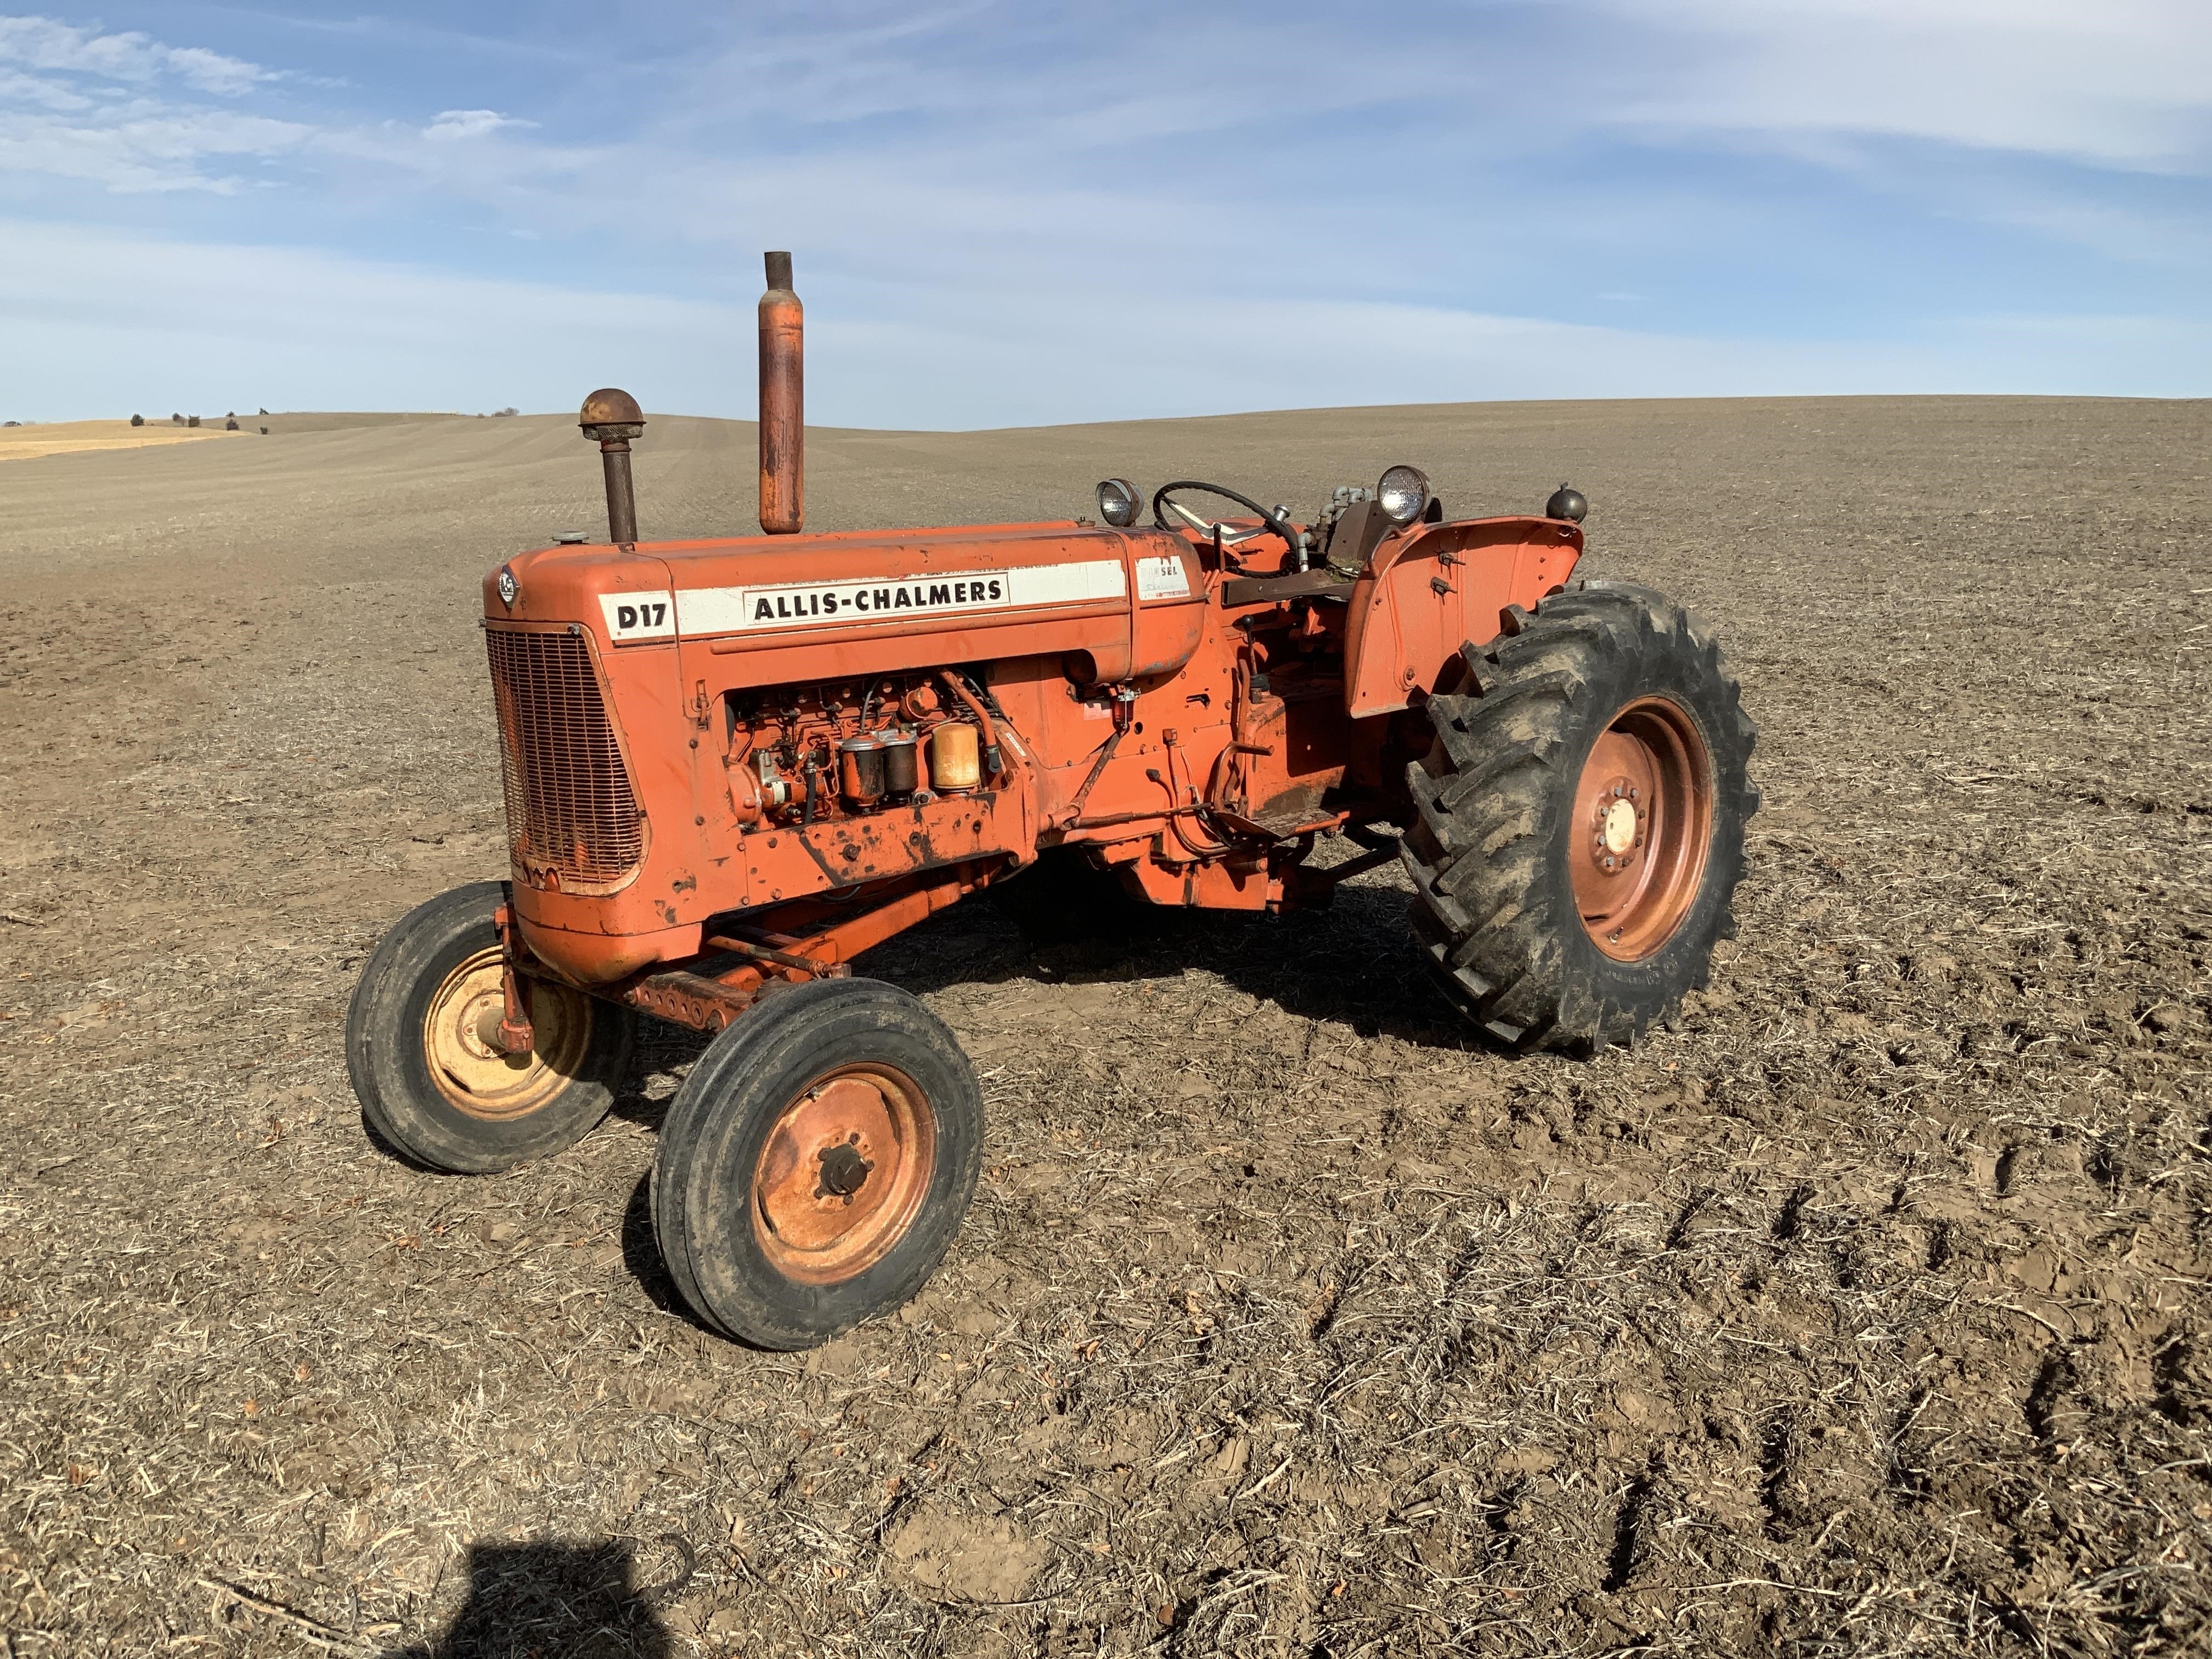 Allis Chalmers D17 Series 3 tractor in Tebbetts, MO